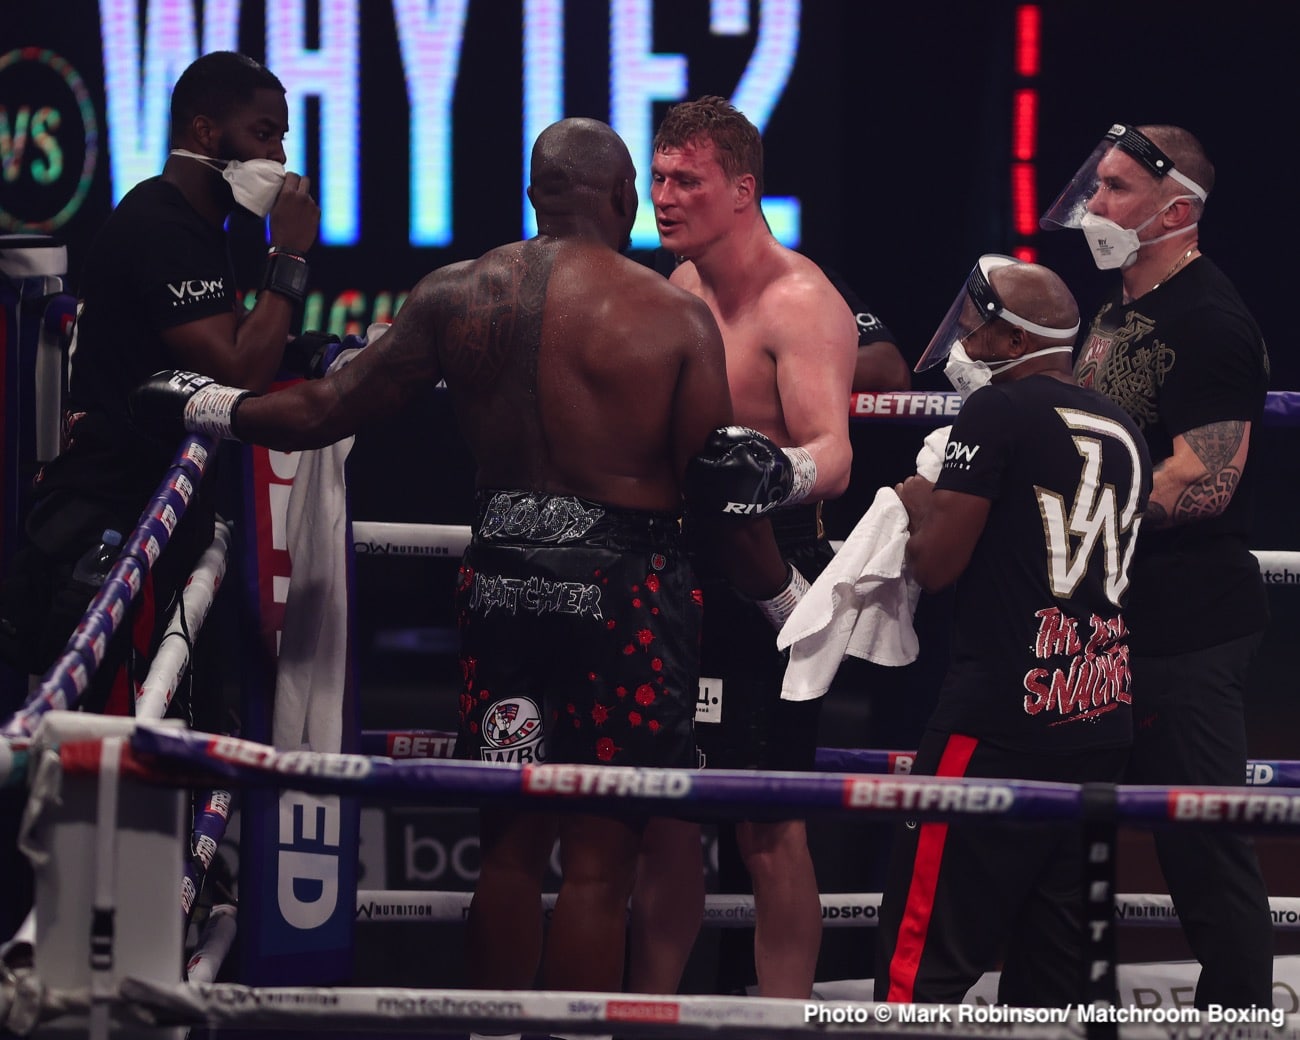 Dillian Whyte, Alexander Povetkin boxing photo and news image